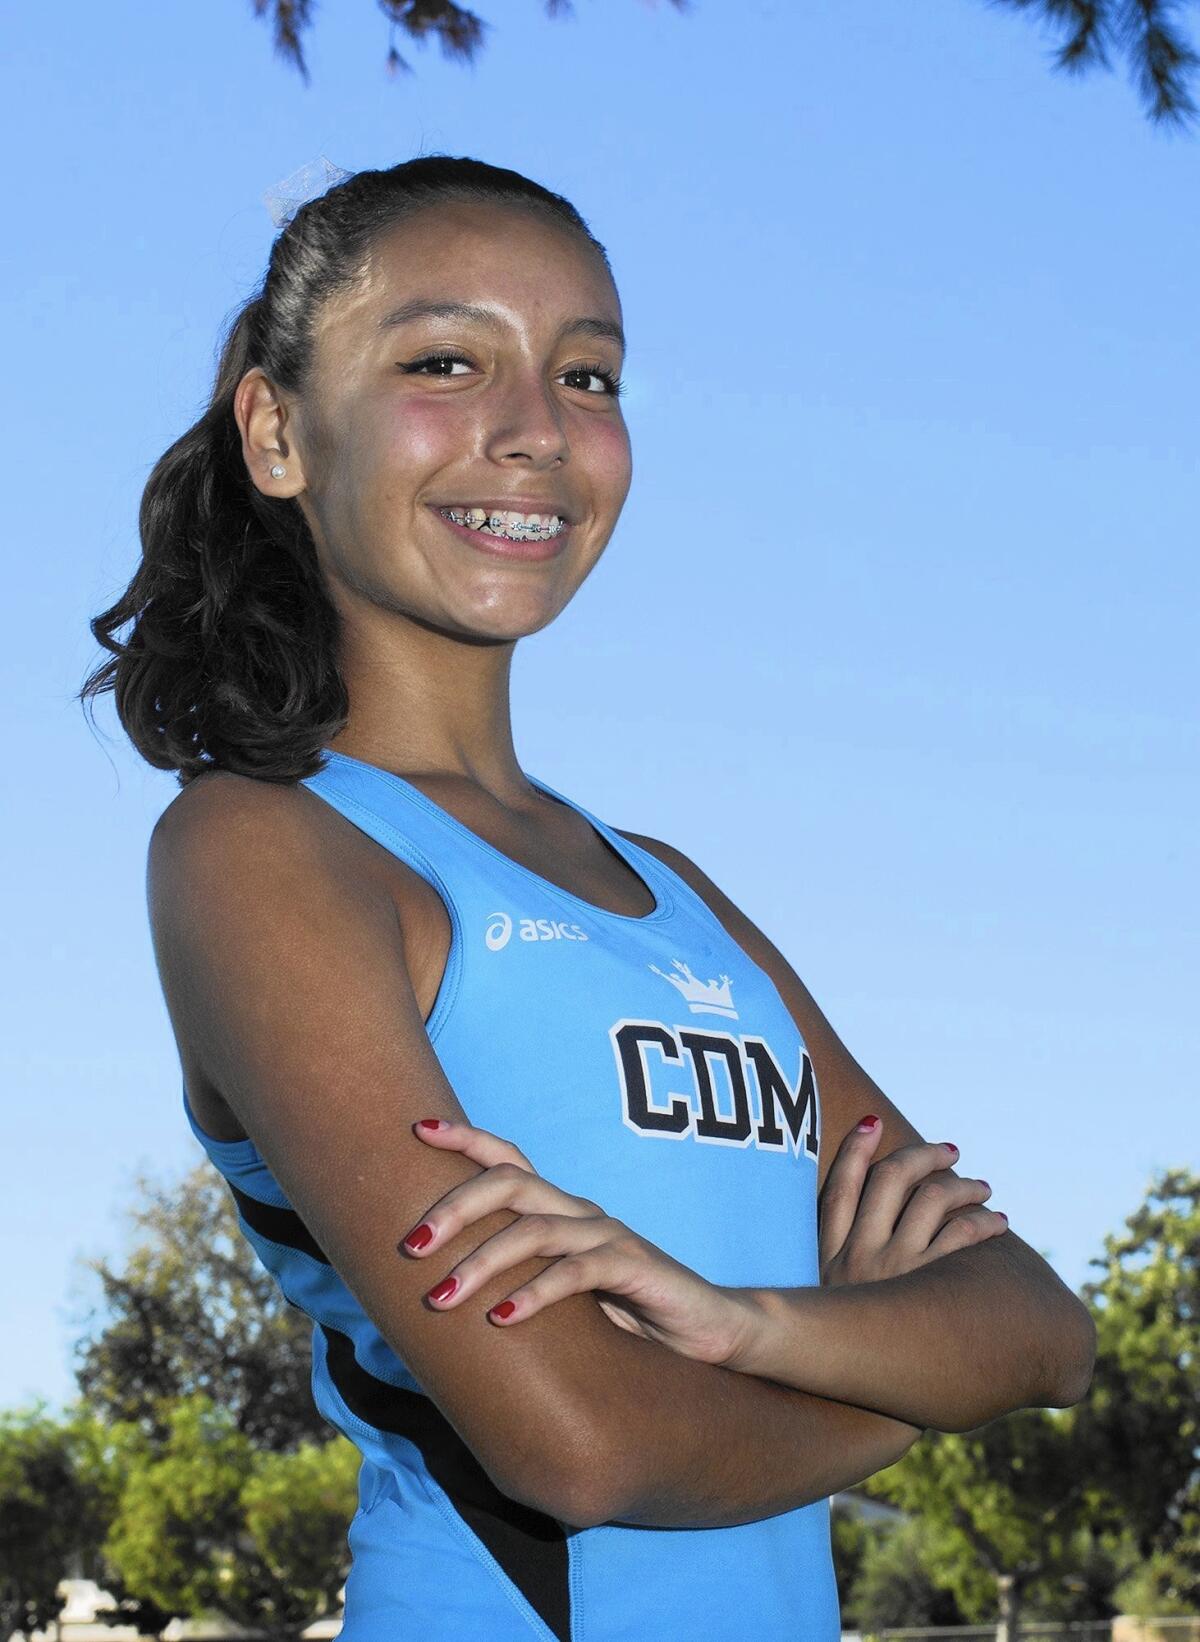 NEWPORT BEACH, CA, September 29, 2015 -- Corona del Mar High's Raquel Powers is the Daily Pilot Athlete of the Week. Powers helped the Sea Kings win the Sunny Hills cross country meet last weekend. (Kevin Chang/ Daily Pilot)